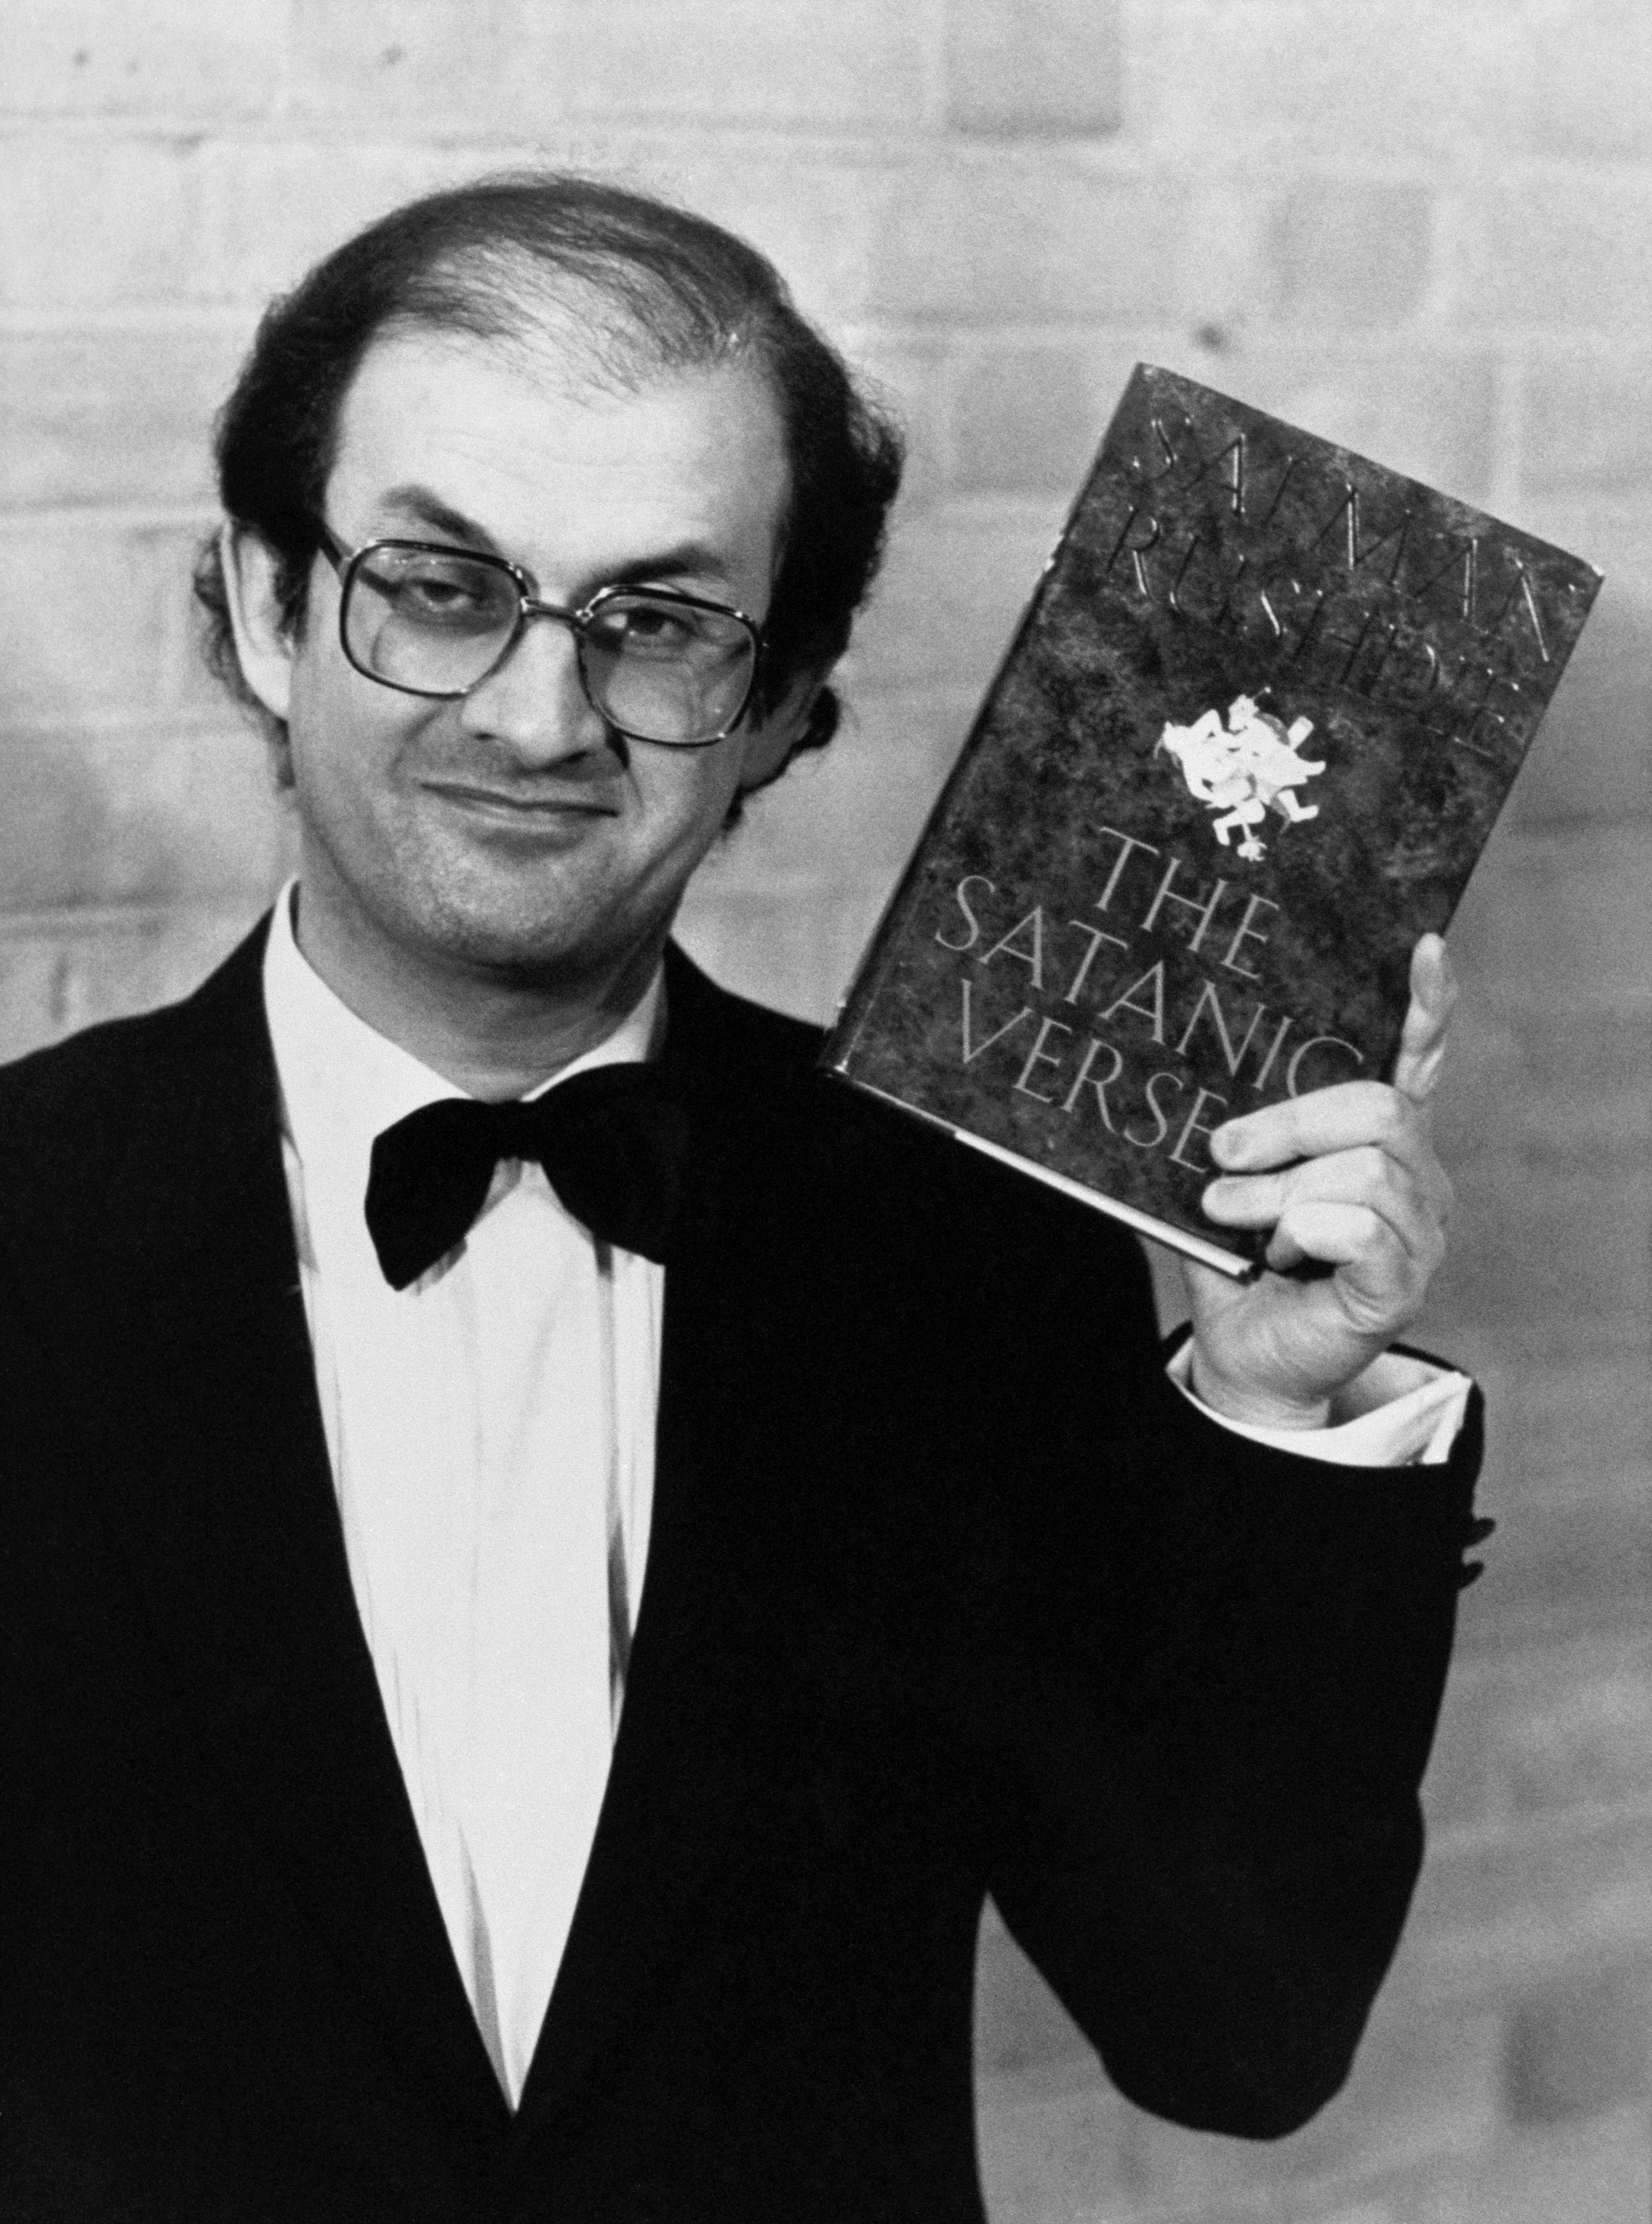 Controversy: Salman Rushdie published The Satanic Verses in 1988